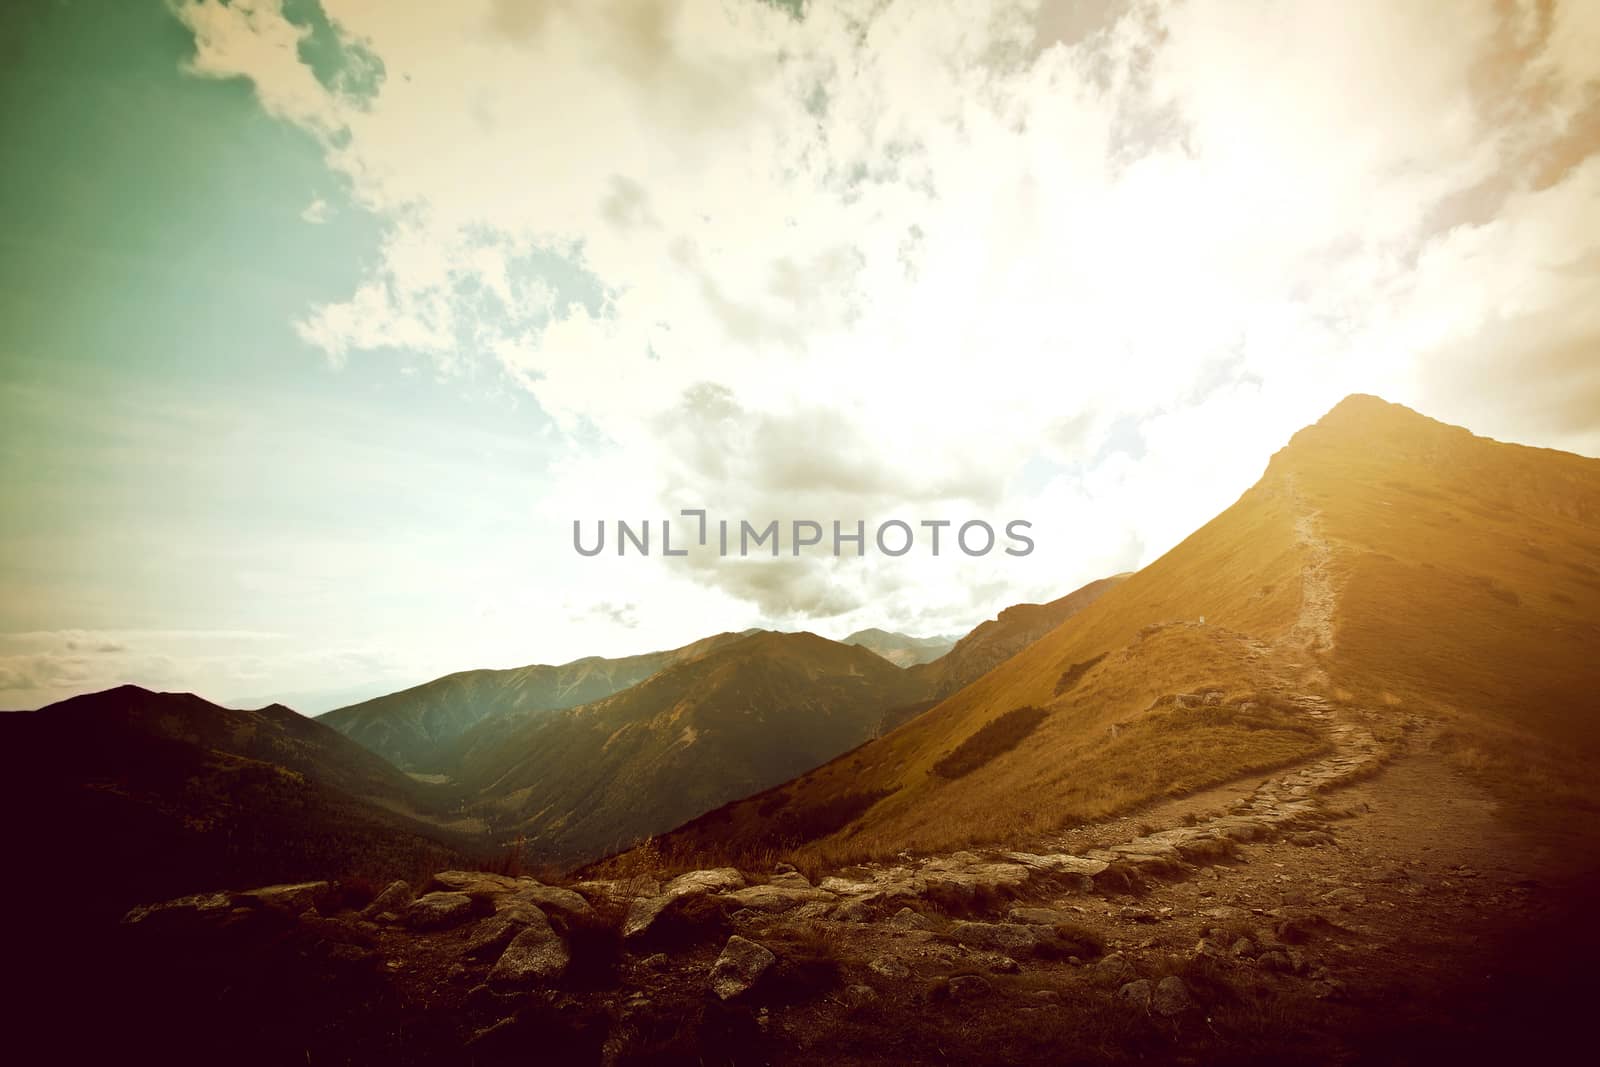 Mountains. Fantasy abstract nature landscape. Nature conceptual image.